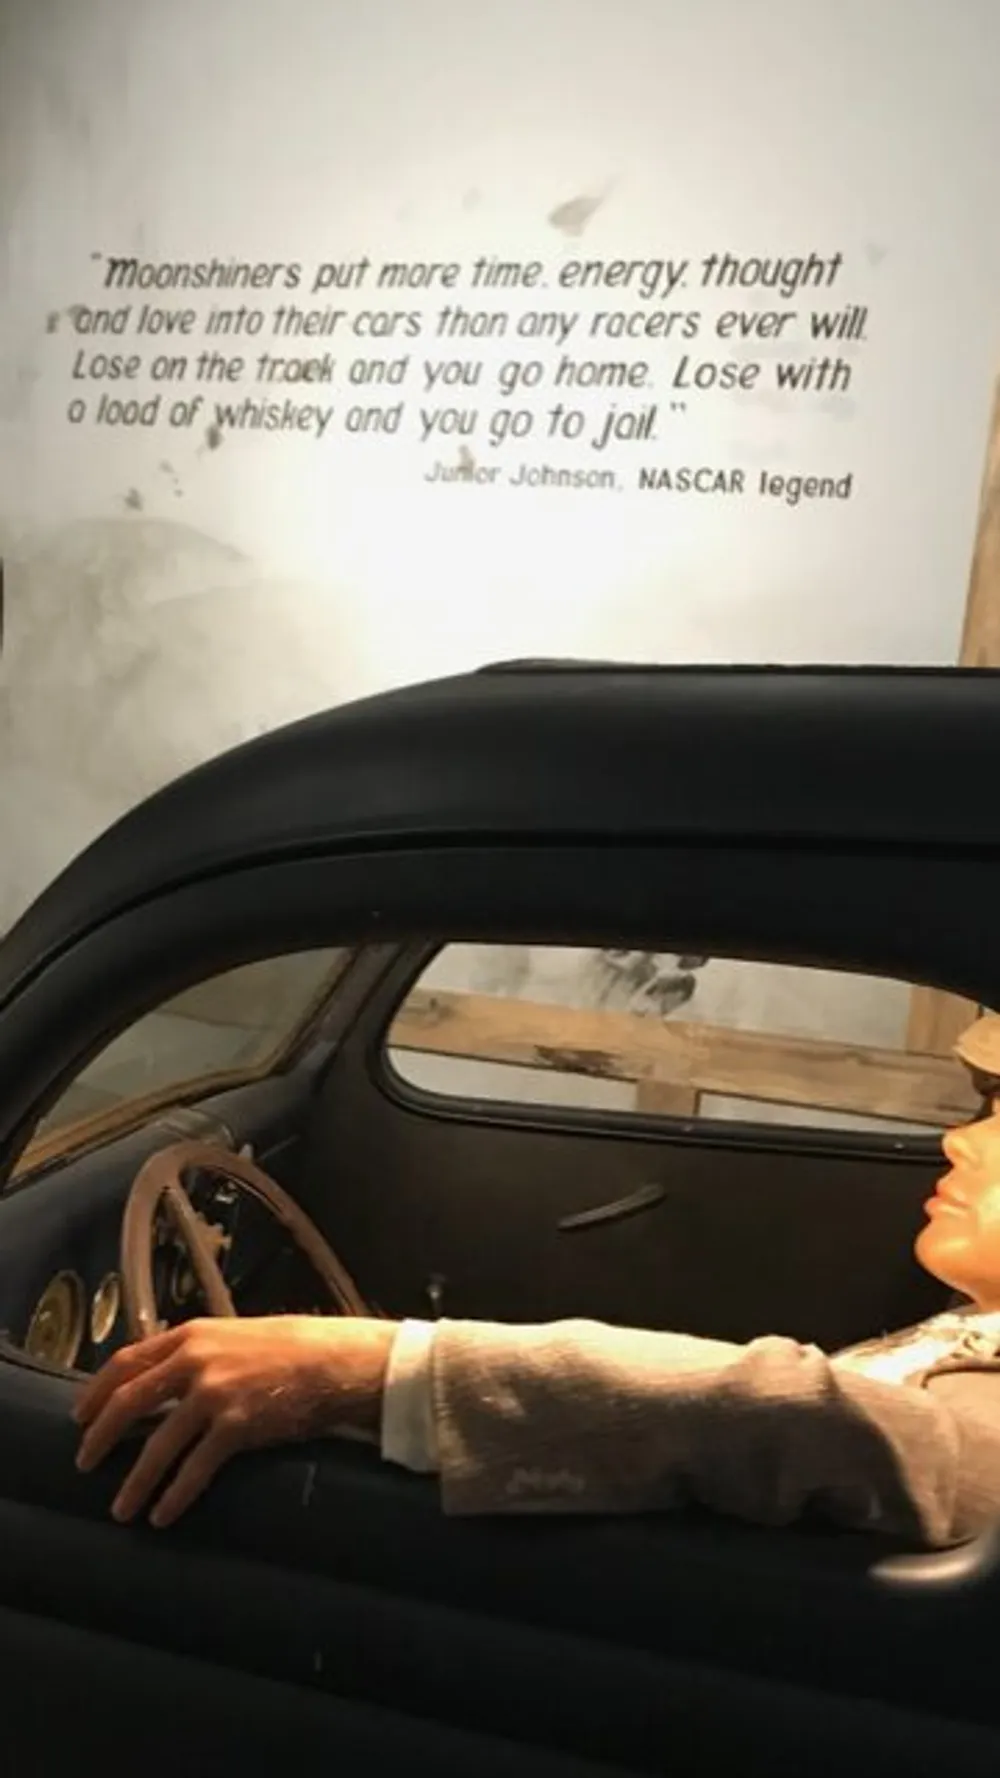 The image displays a mannequin portraying a driver sitting in an old car with a quote from Junior Johnson a NASCAR legend about moonshiners dedication to their cars written on the wall behind